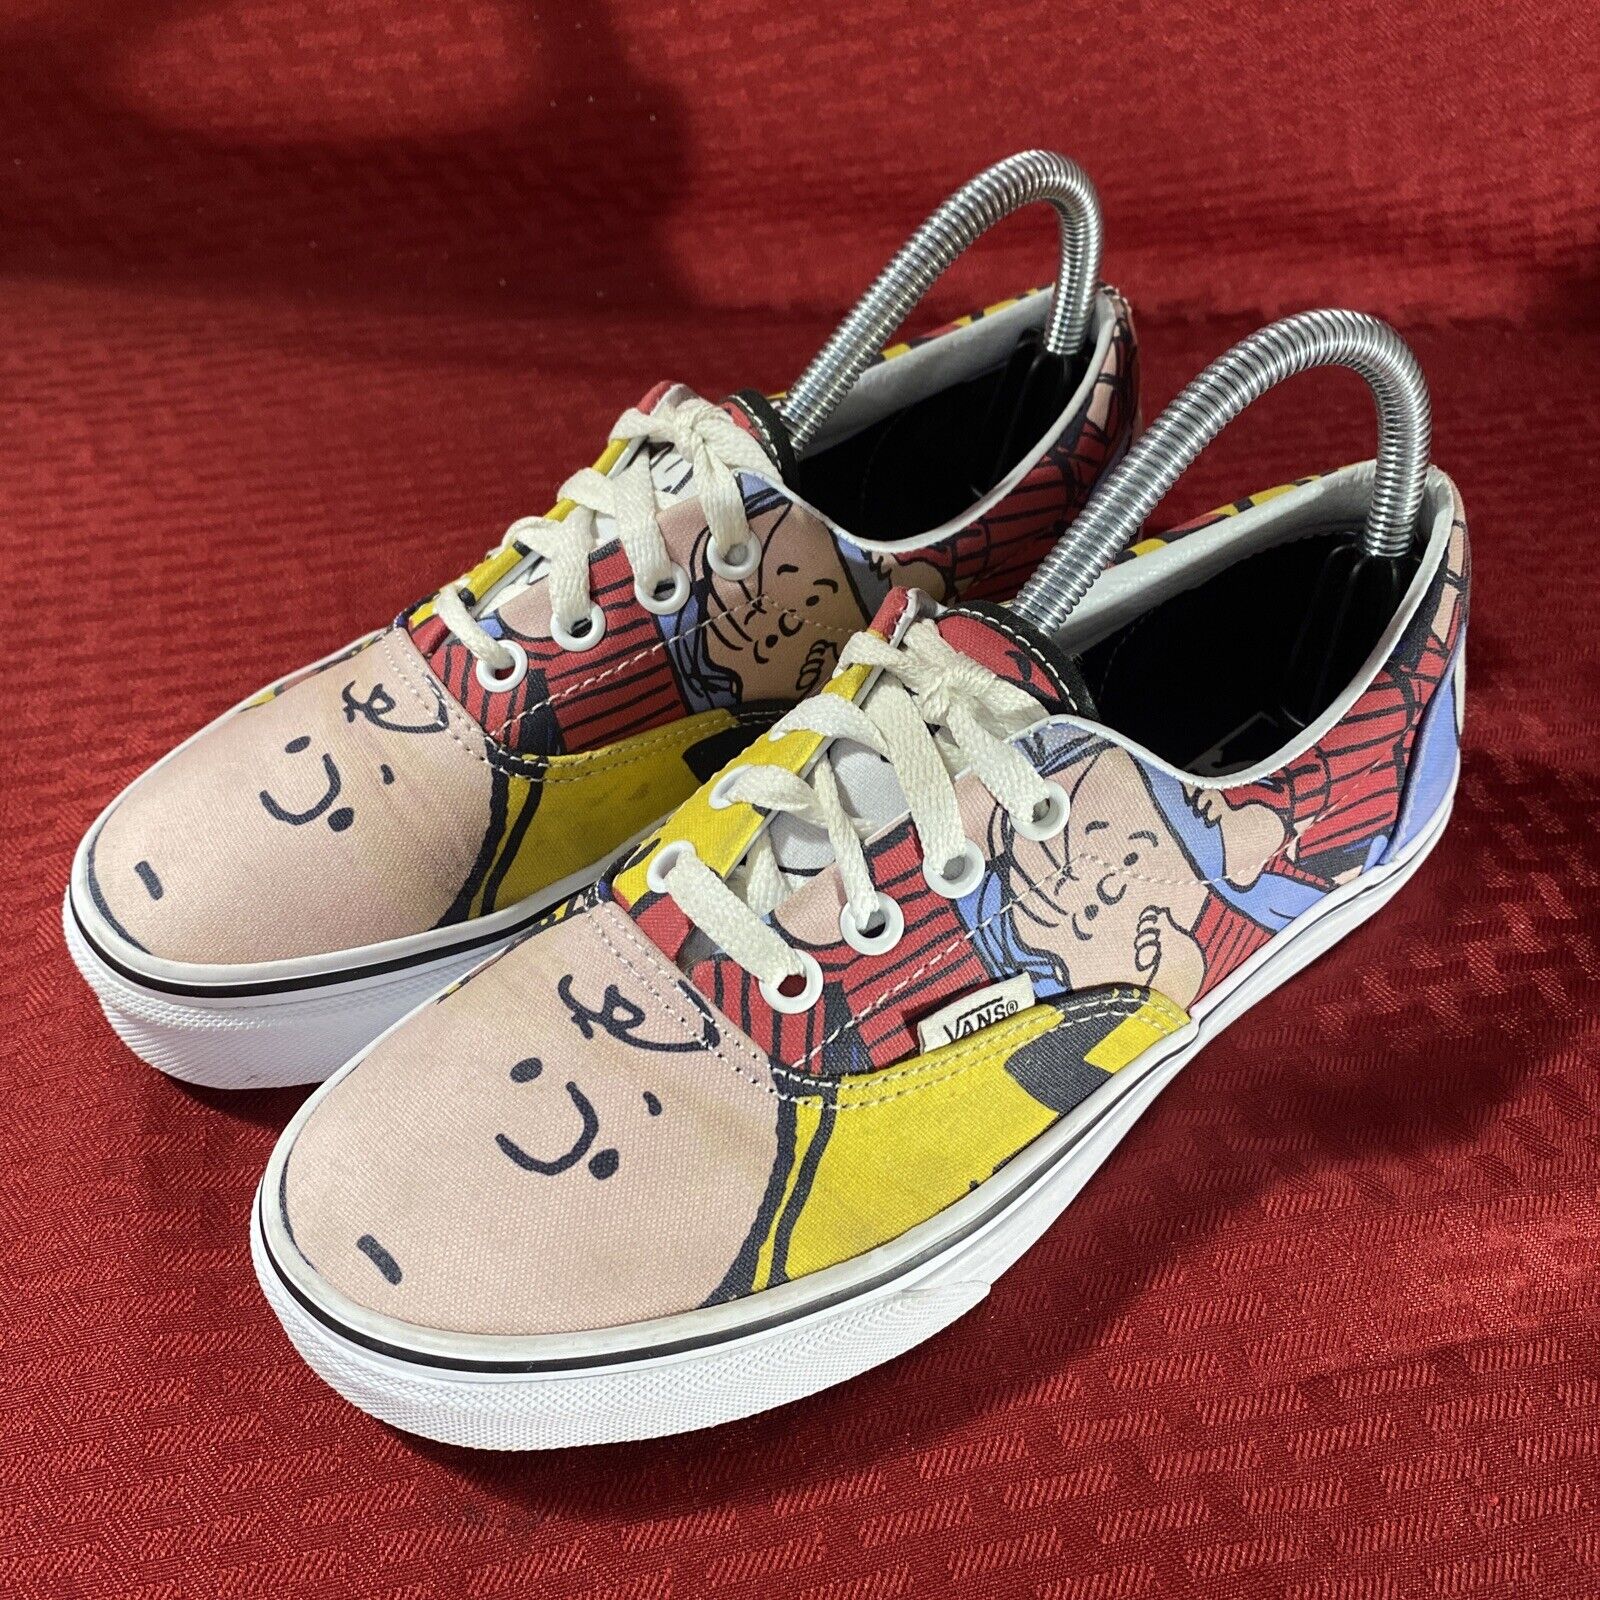 Vans x Peanuts Gang Era Charlie Brown Sneakers Limited Edition US Size 5.5